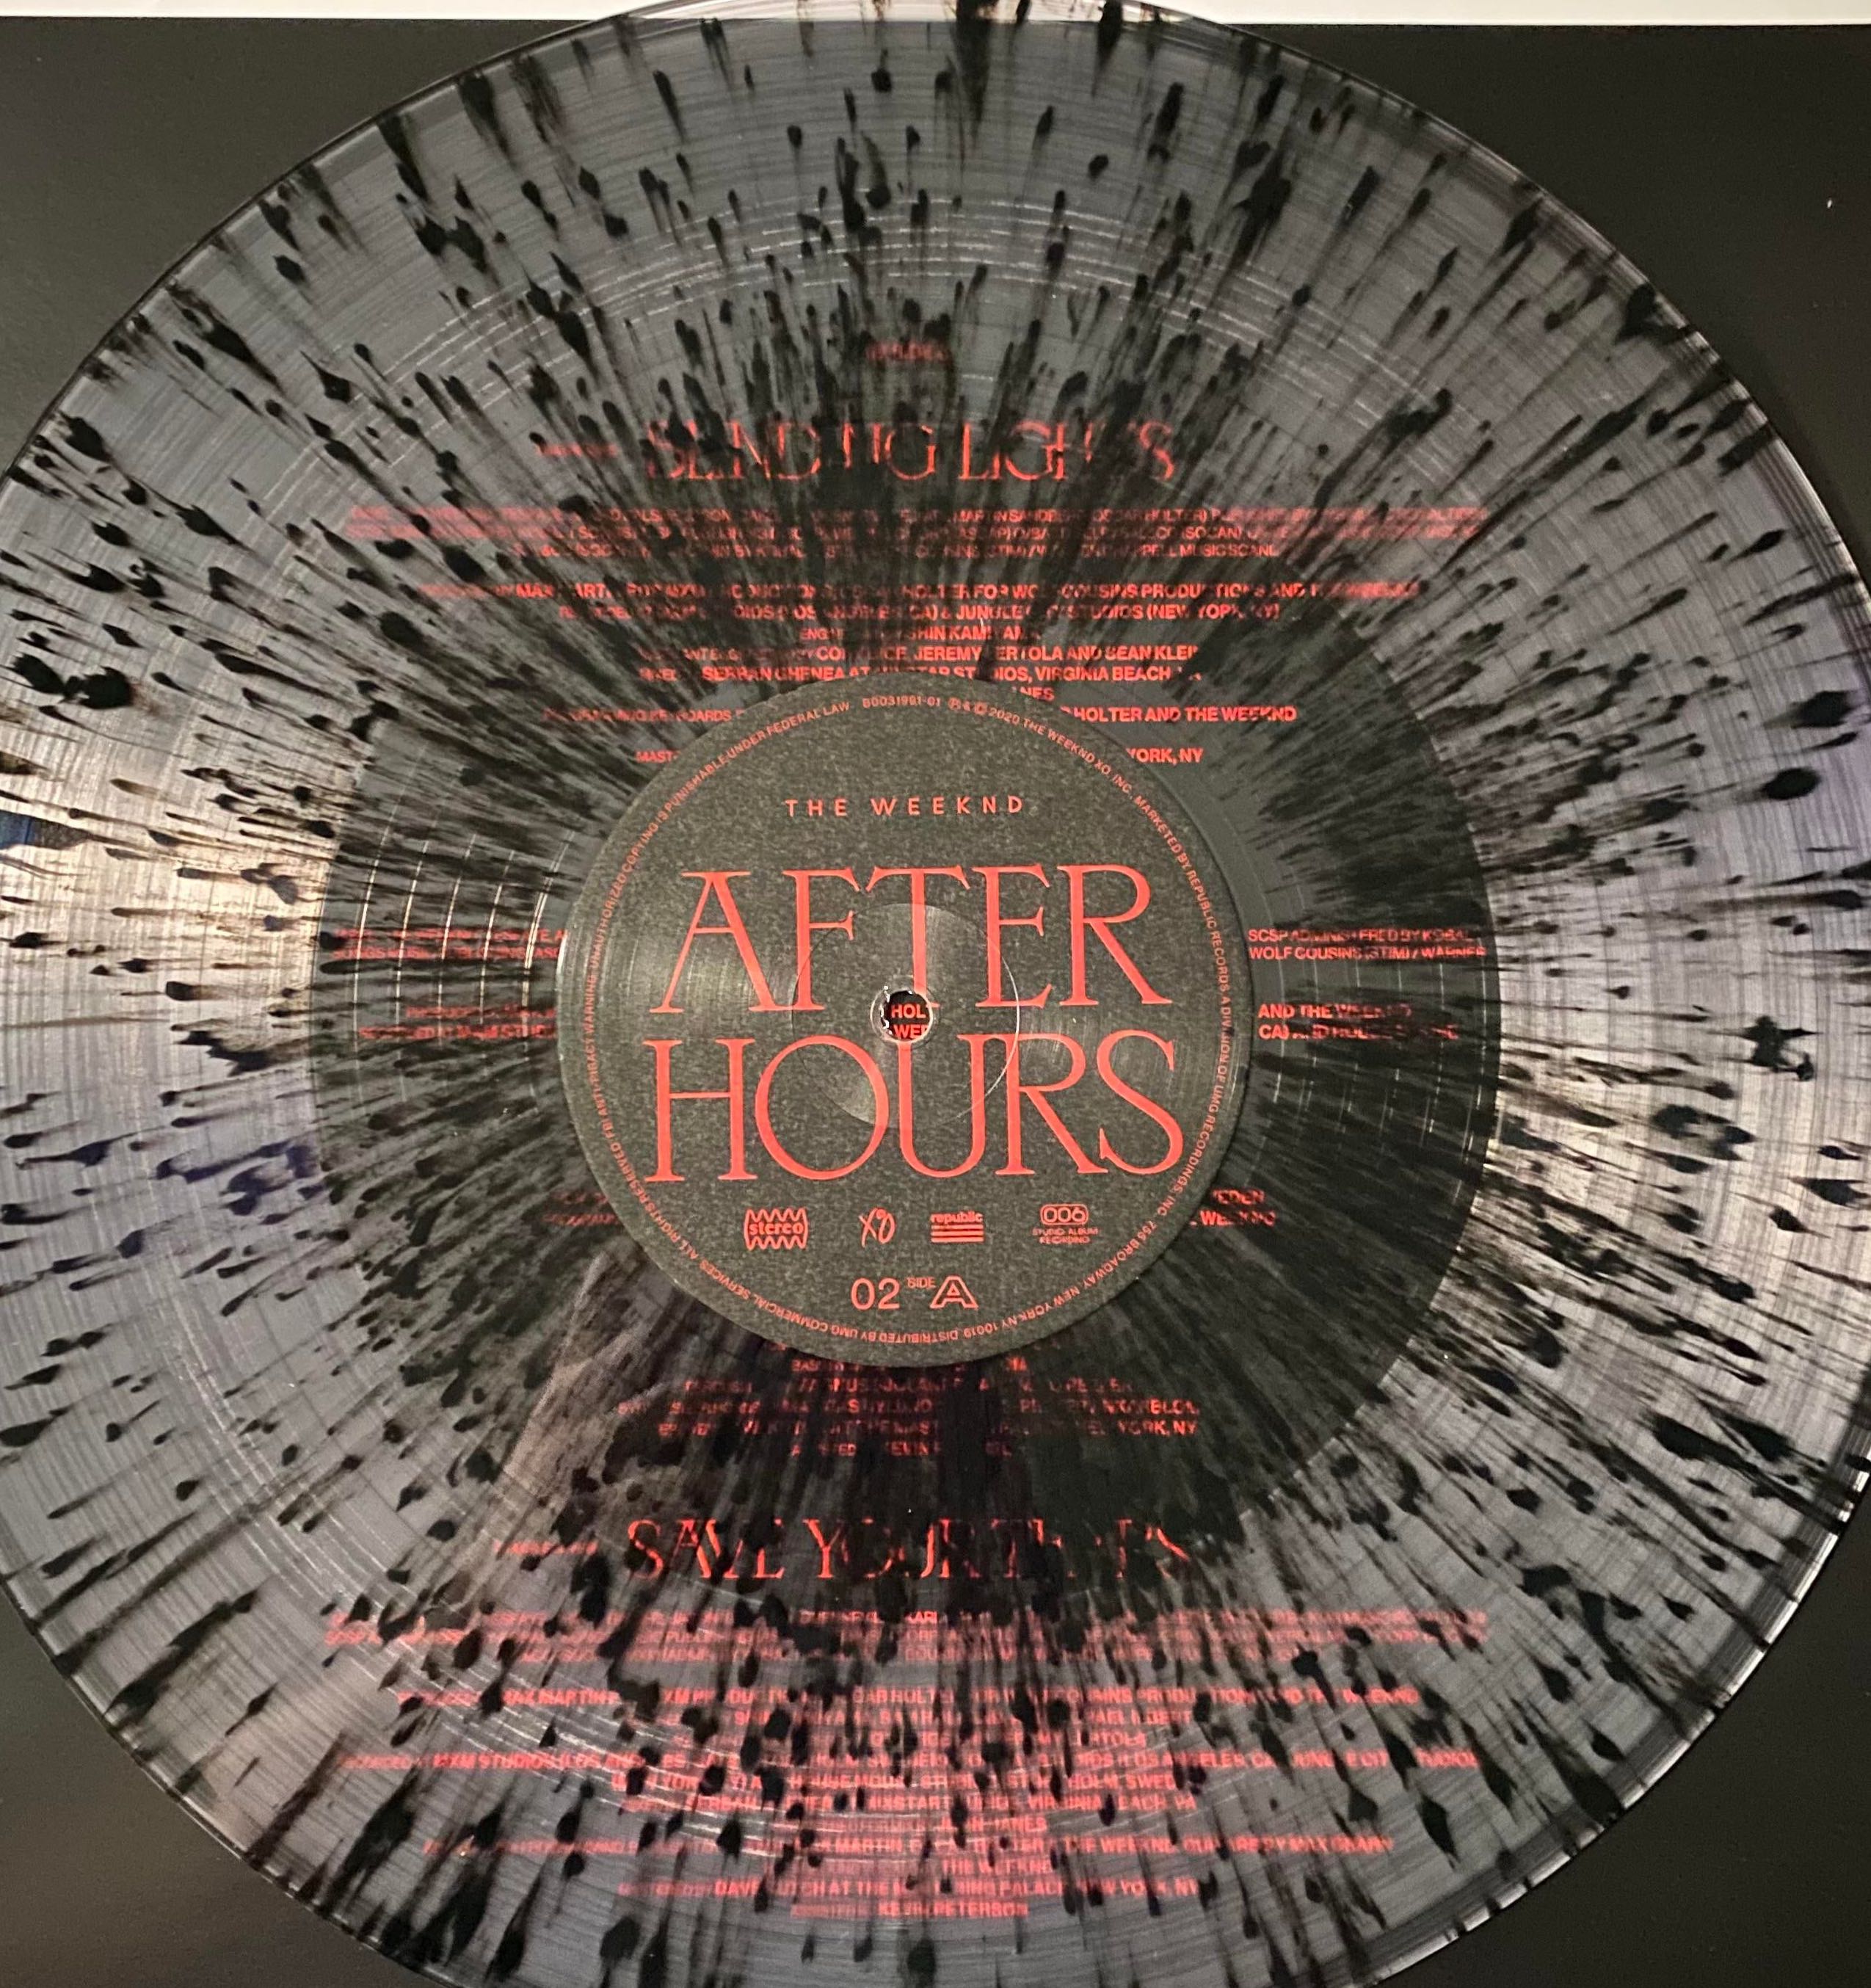 After Hours by The Weeknd (Vinyl Concept) by likelytobeanartist on